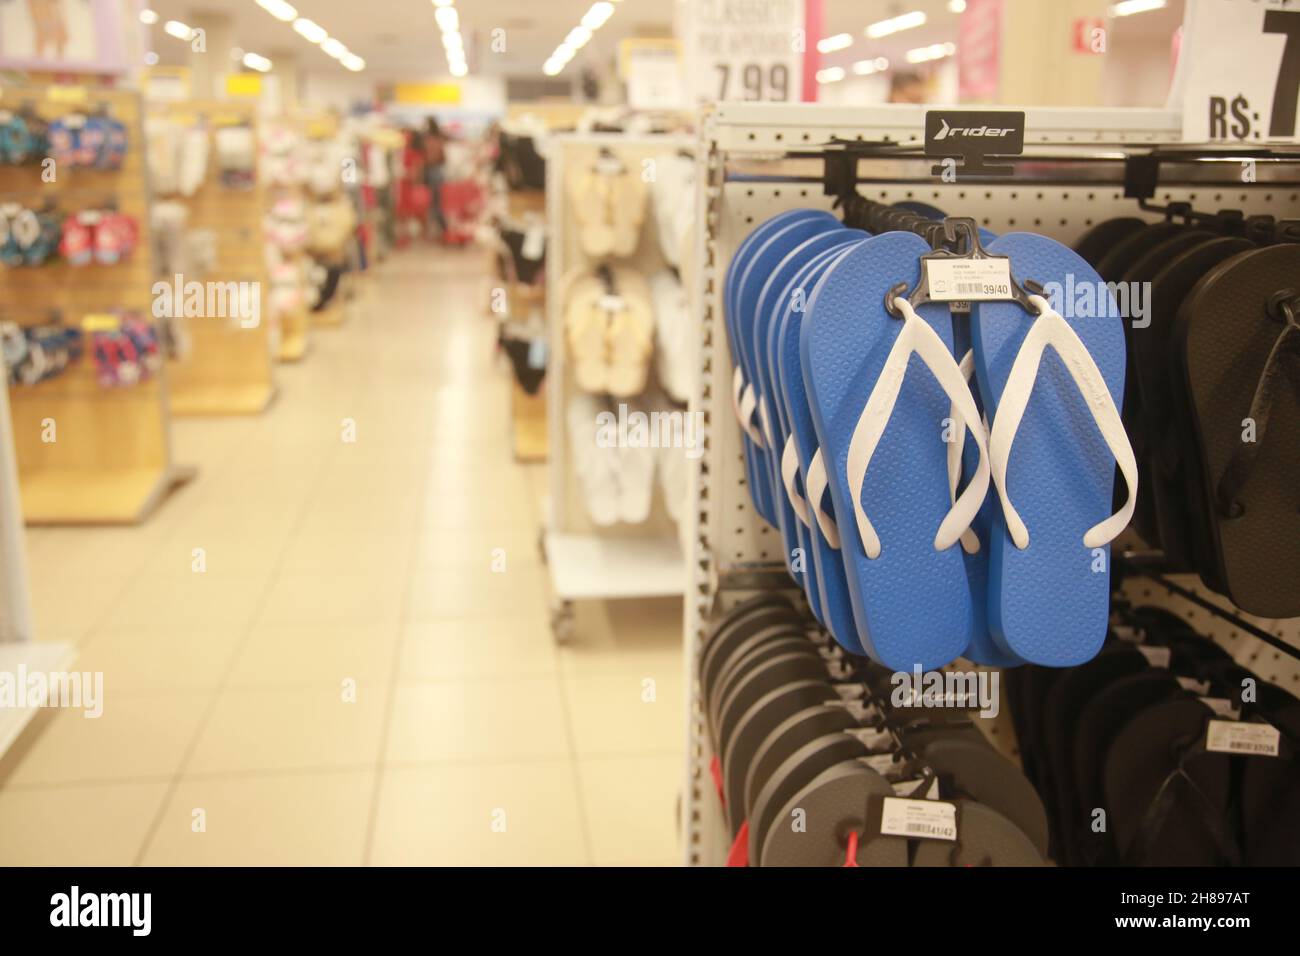 salvador, bahia, brazil - november 26, 2021: sandals are seen for sale in a supermarket in the city of Salvador. Stock Photo